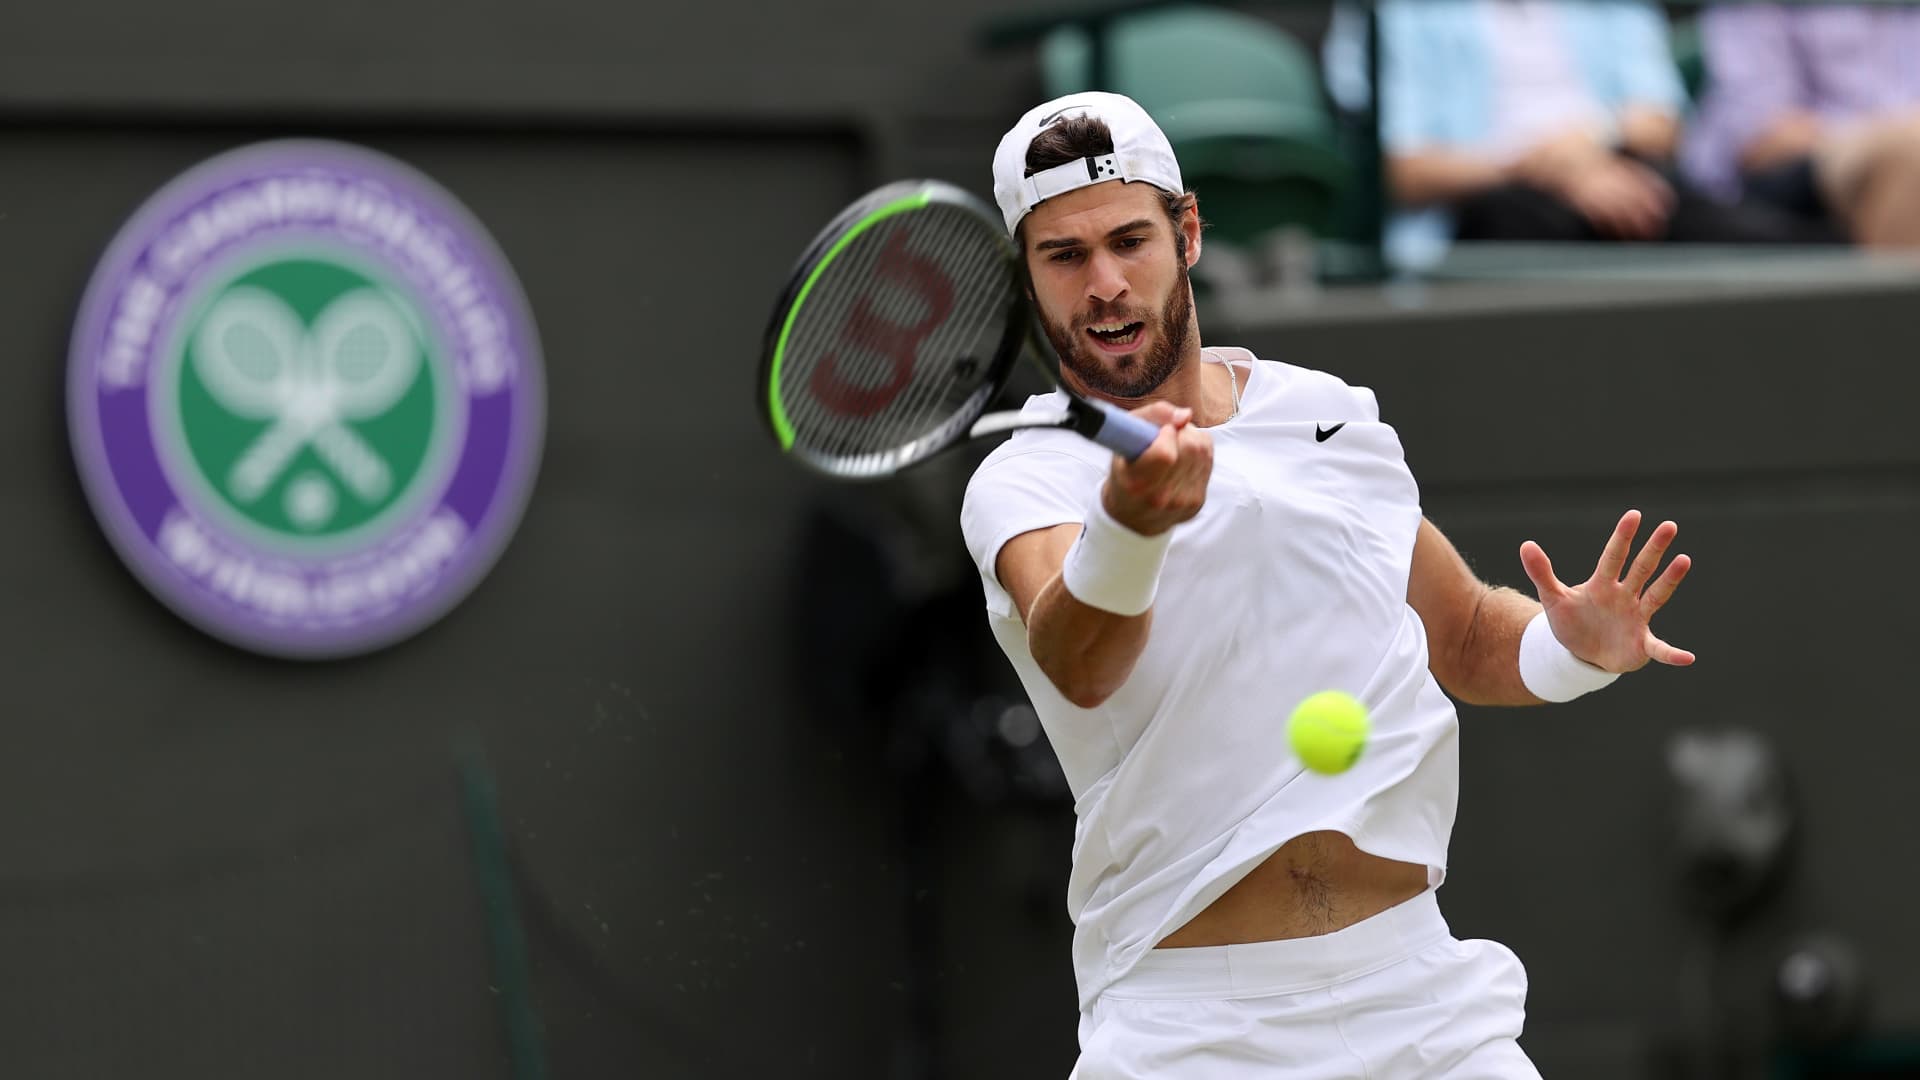 Karen Khachanov of Russia plays a backhand during his men's Singles Quarter Final match against Denis Shapovalov of Canada on Day Nine of The Championships - Wimbledon 2021 at All England Lawn Tennis and Croquet Club on July 07, 2021 in London, England.